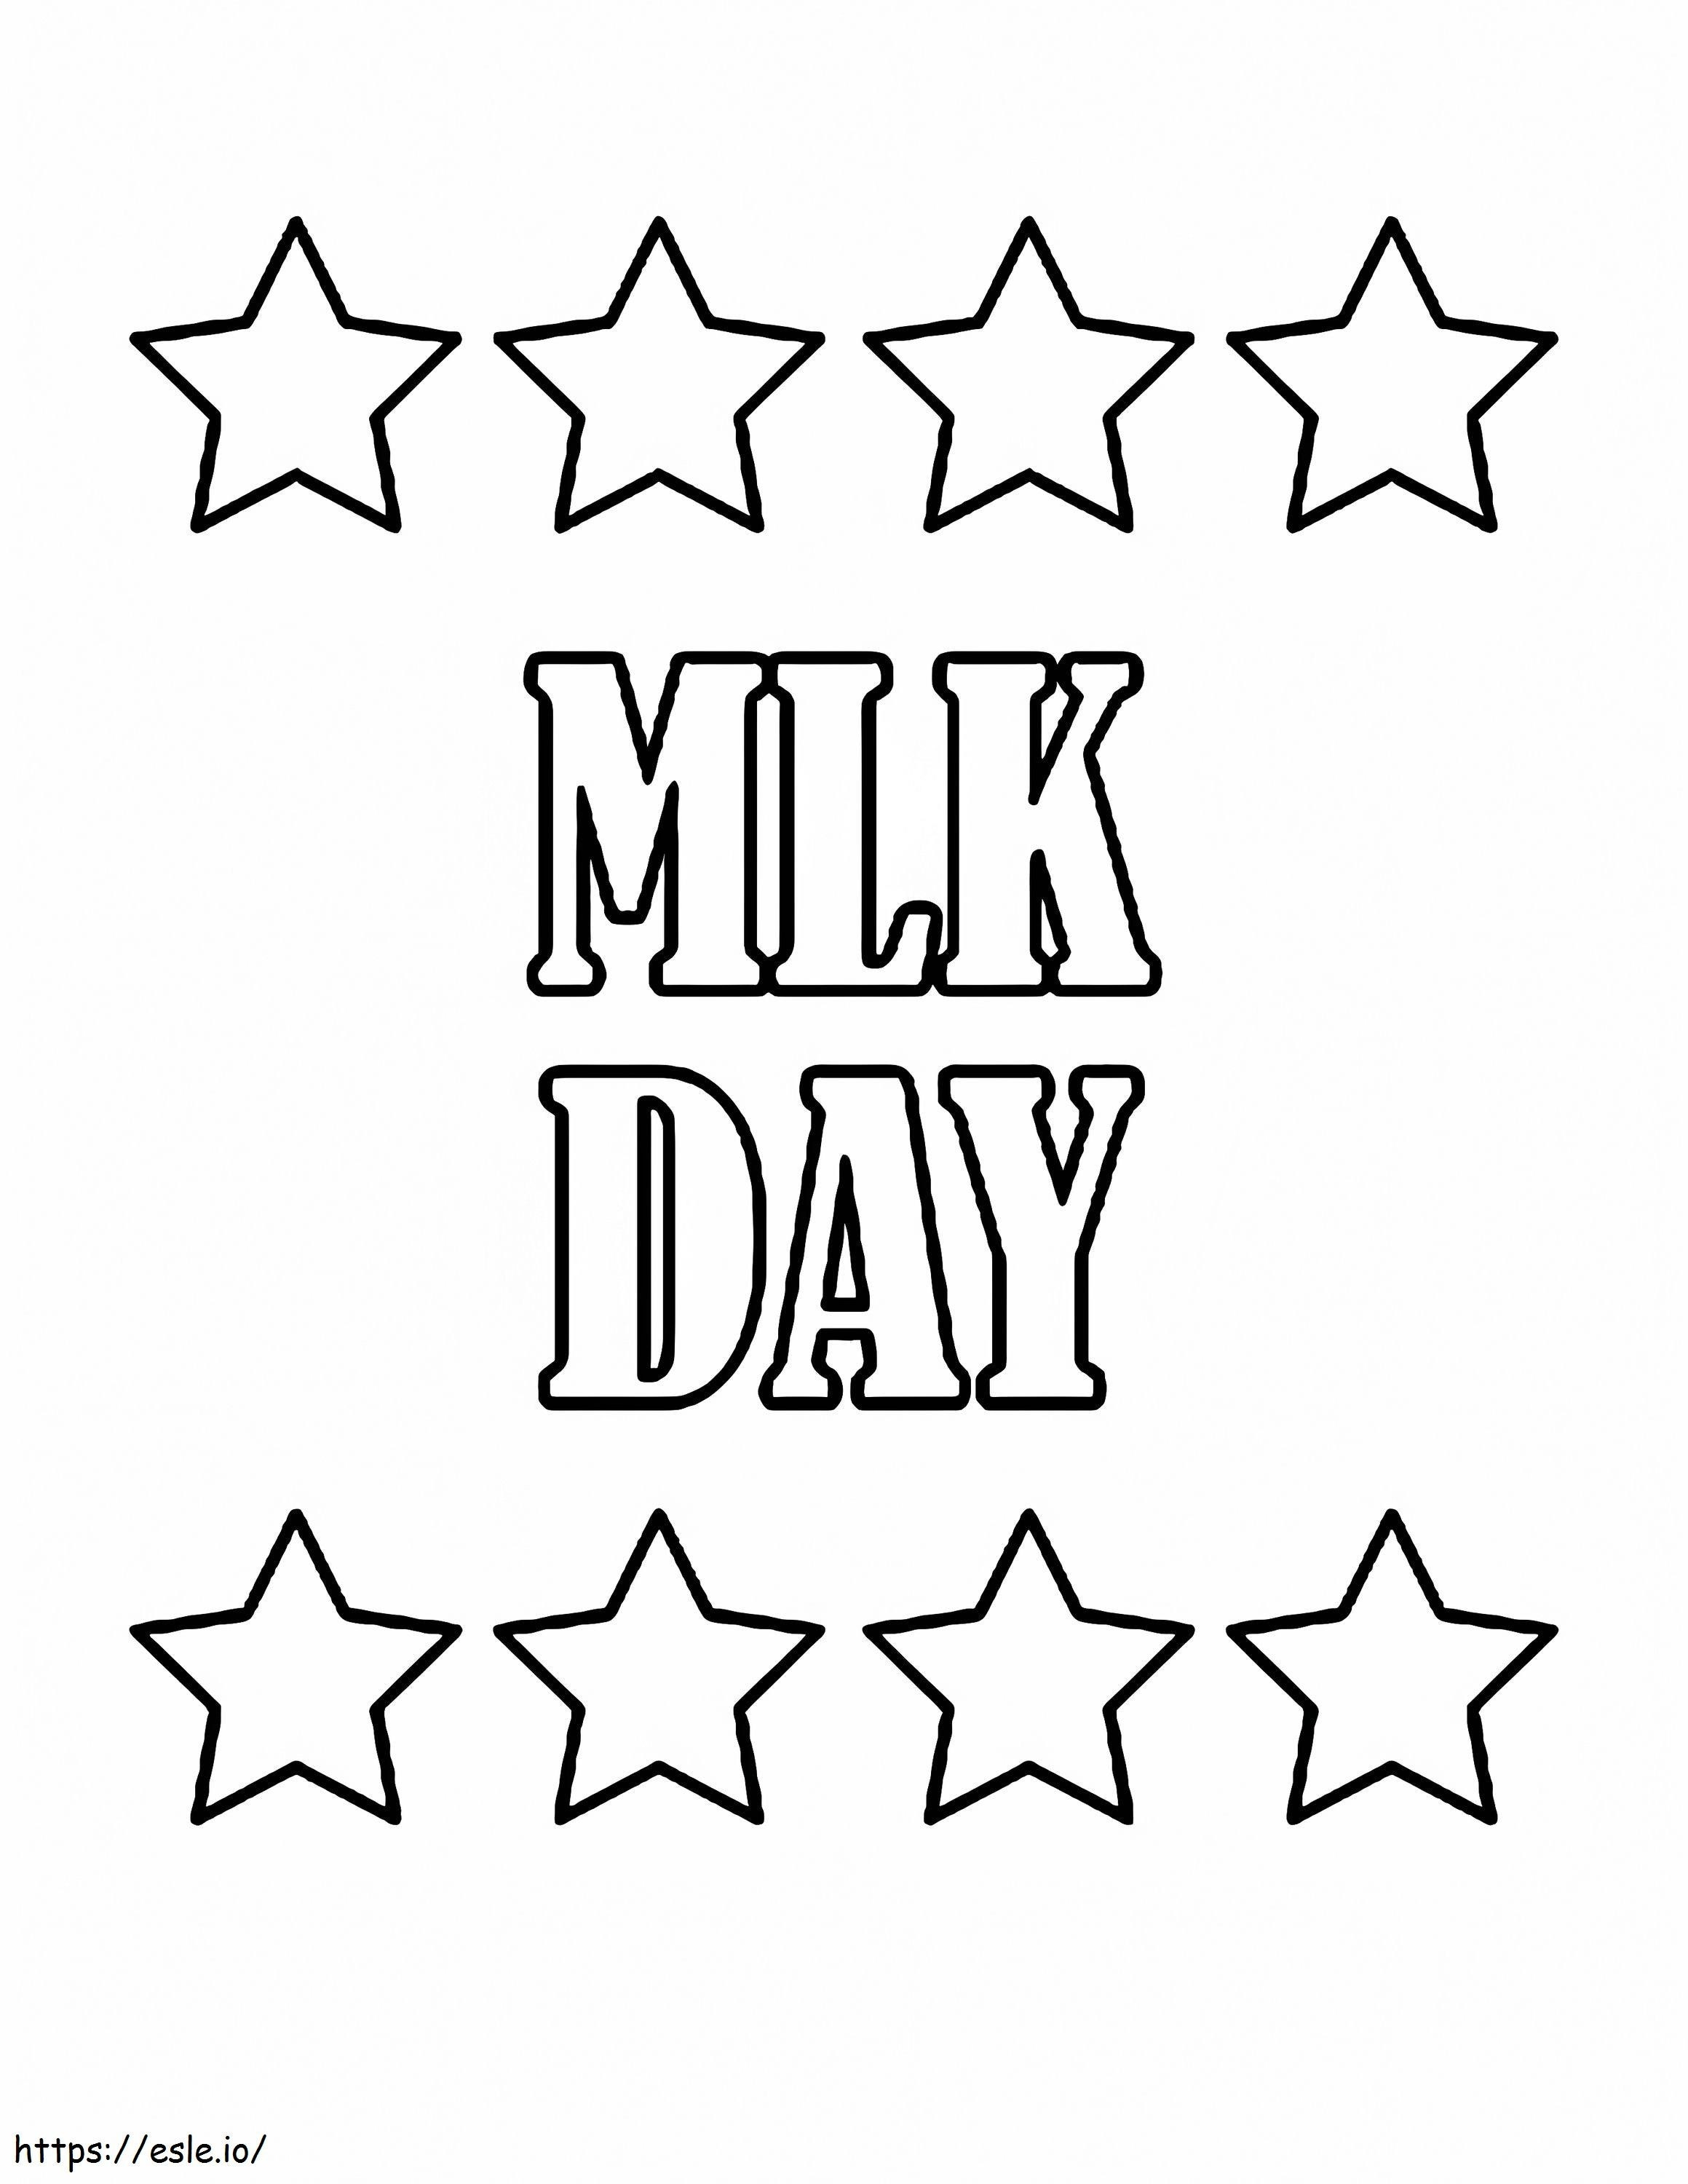 Martin Luther King Jr. Day 5 coloring page